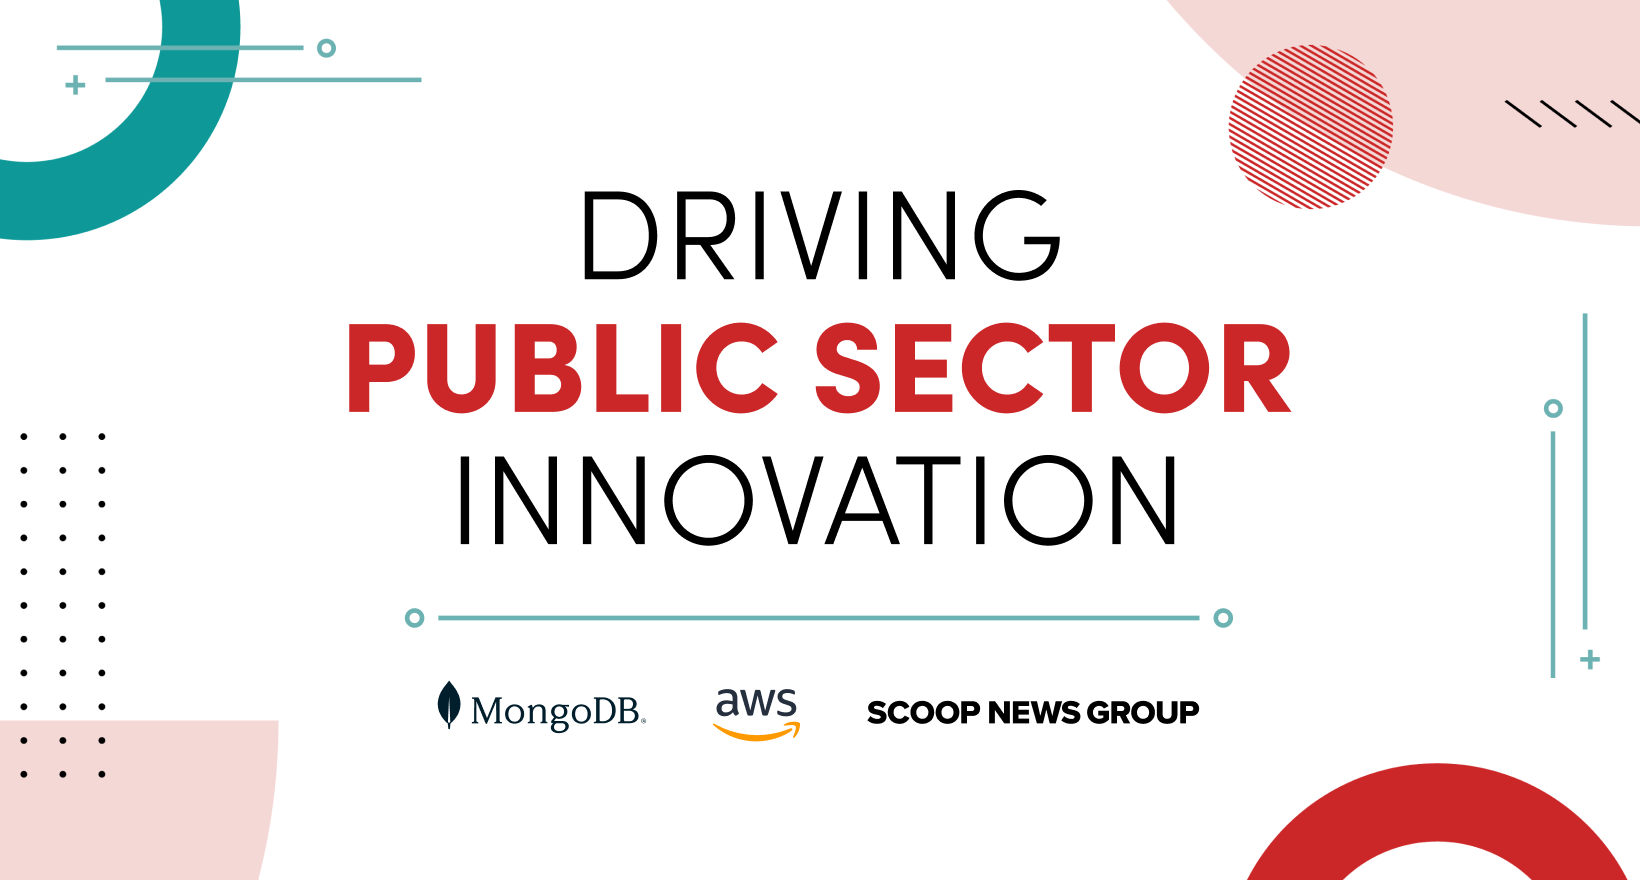 Driving Public Sector Innovation - MongoDB AWS Scoop News Group